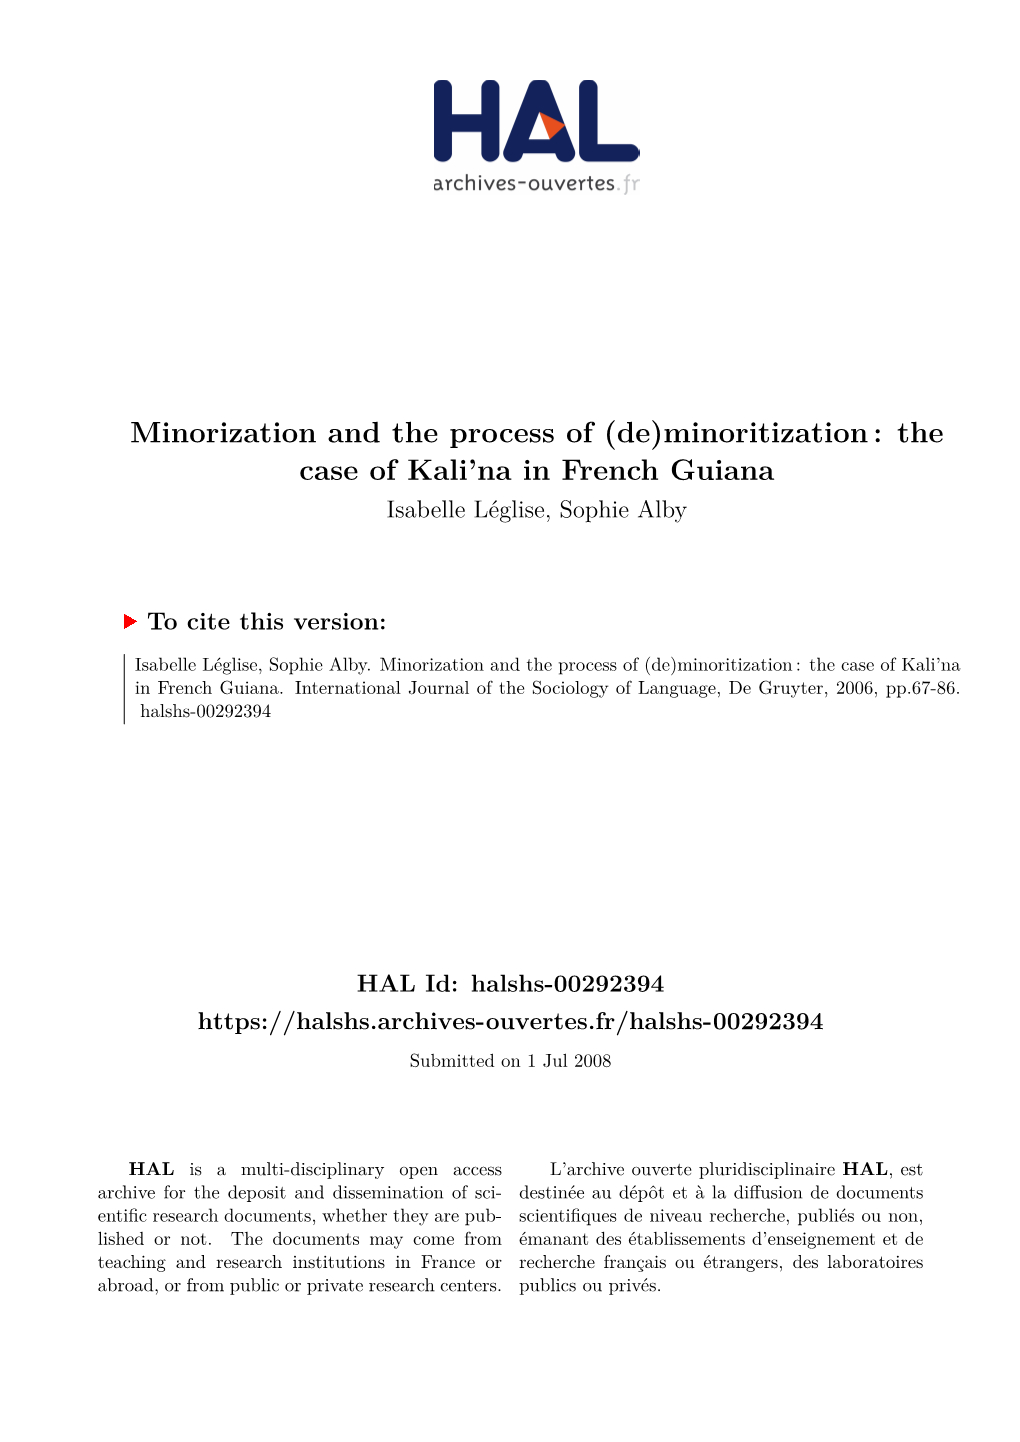 Minoritization : the Case of Kali’Na in French Guiana Isabelle Léglise, Sophie Alby